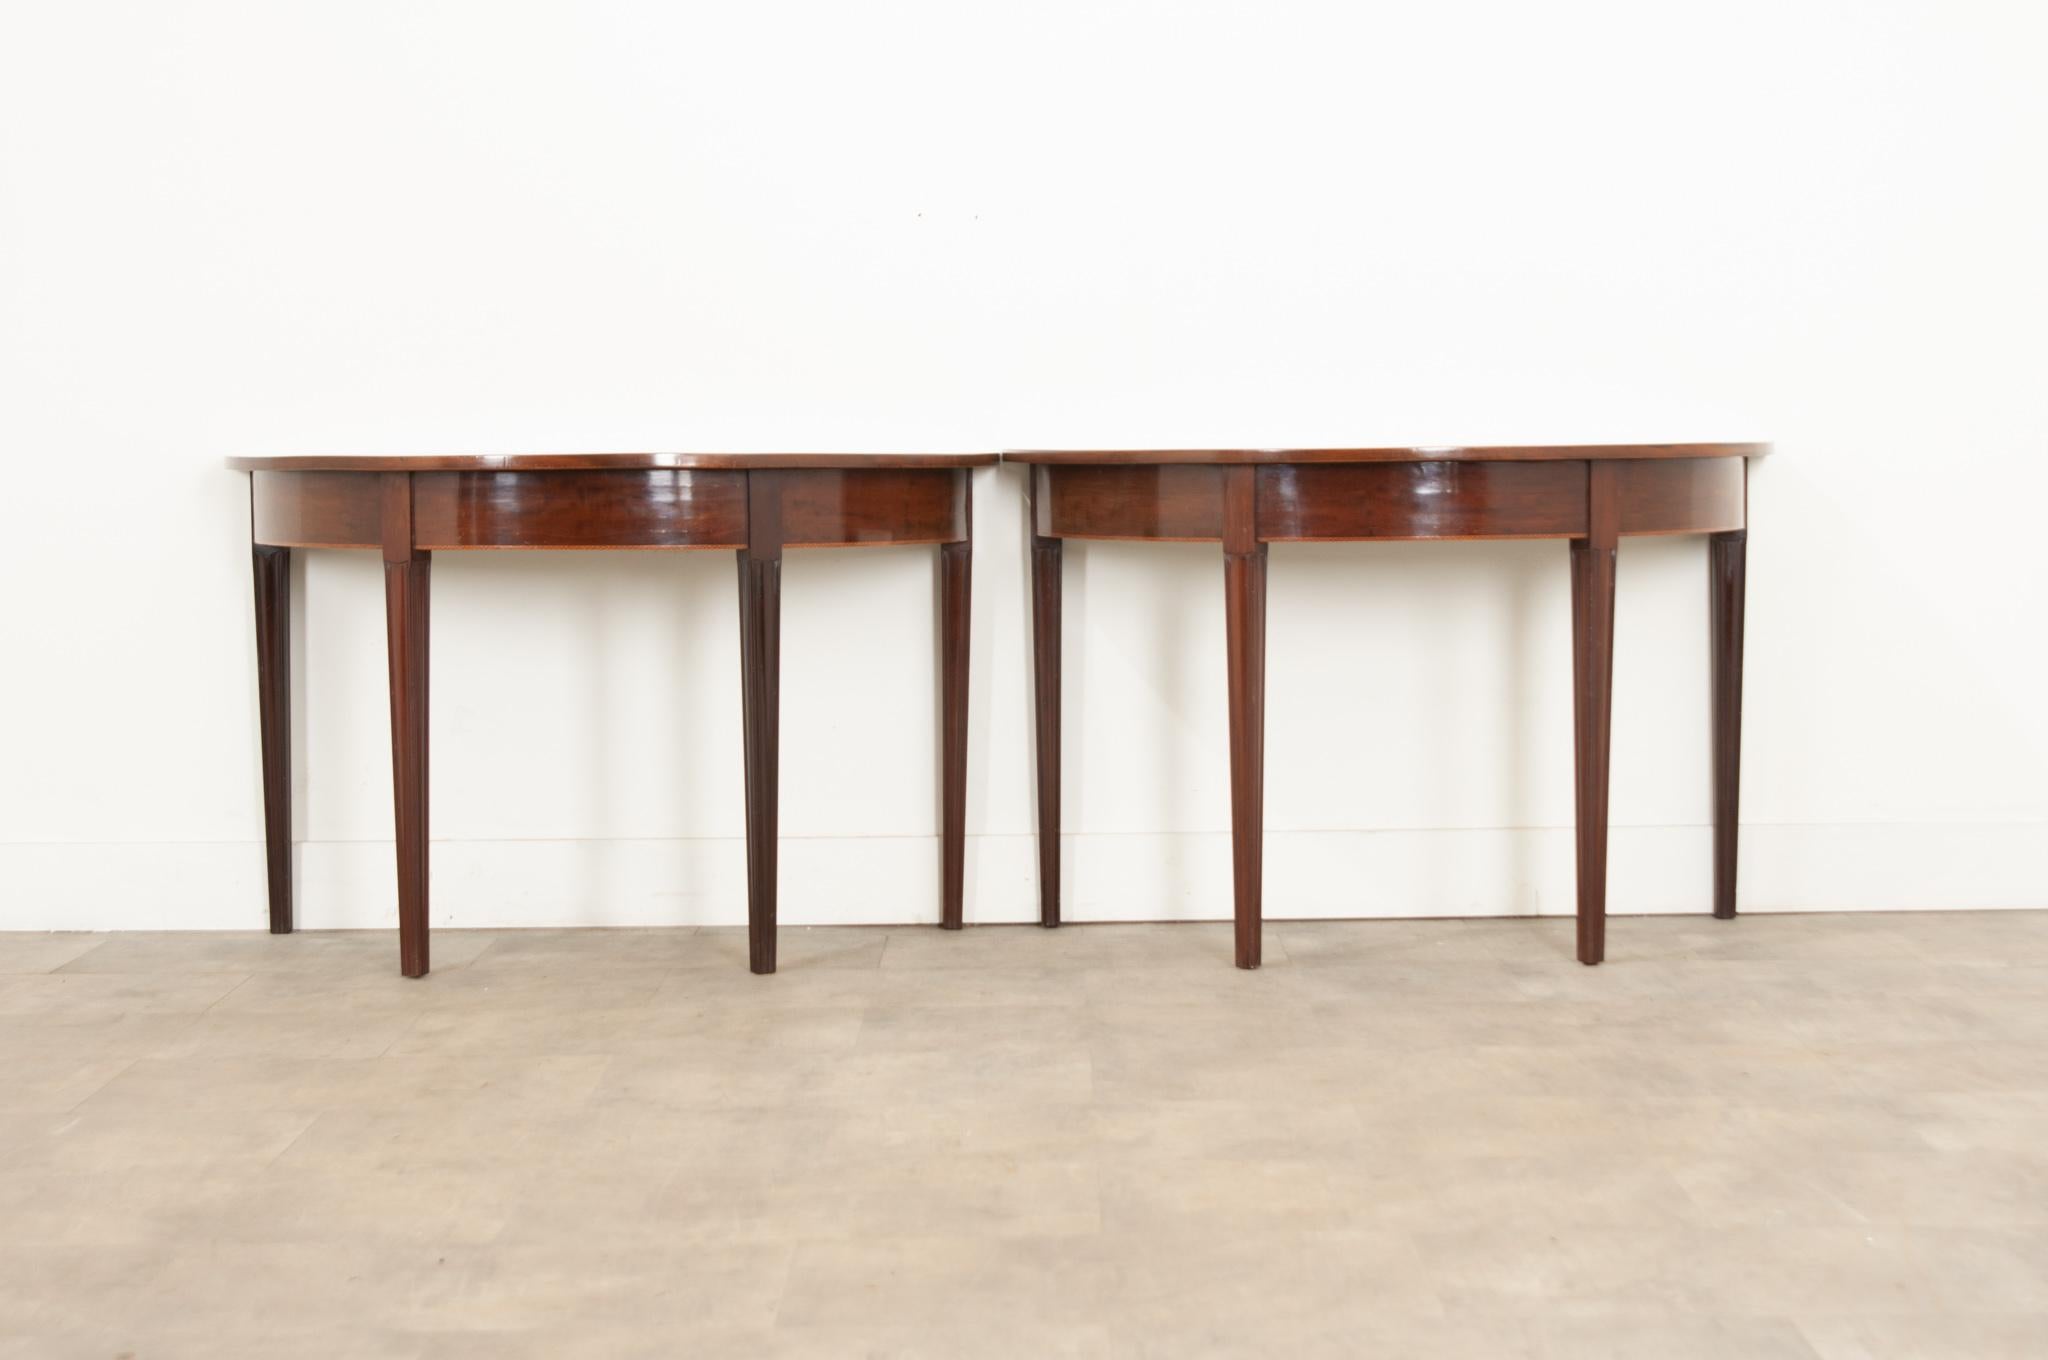 A pair of classic English mahogany demilune console tables with inlay banding and four tapered legs circa 1860. Created in England during the 19th century, each of this pair of demilunes features a semi-circular top sitting above a simple apron made